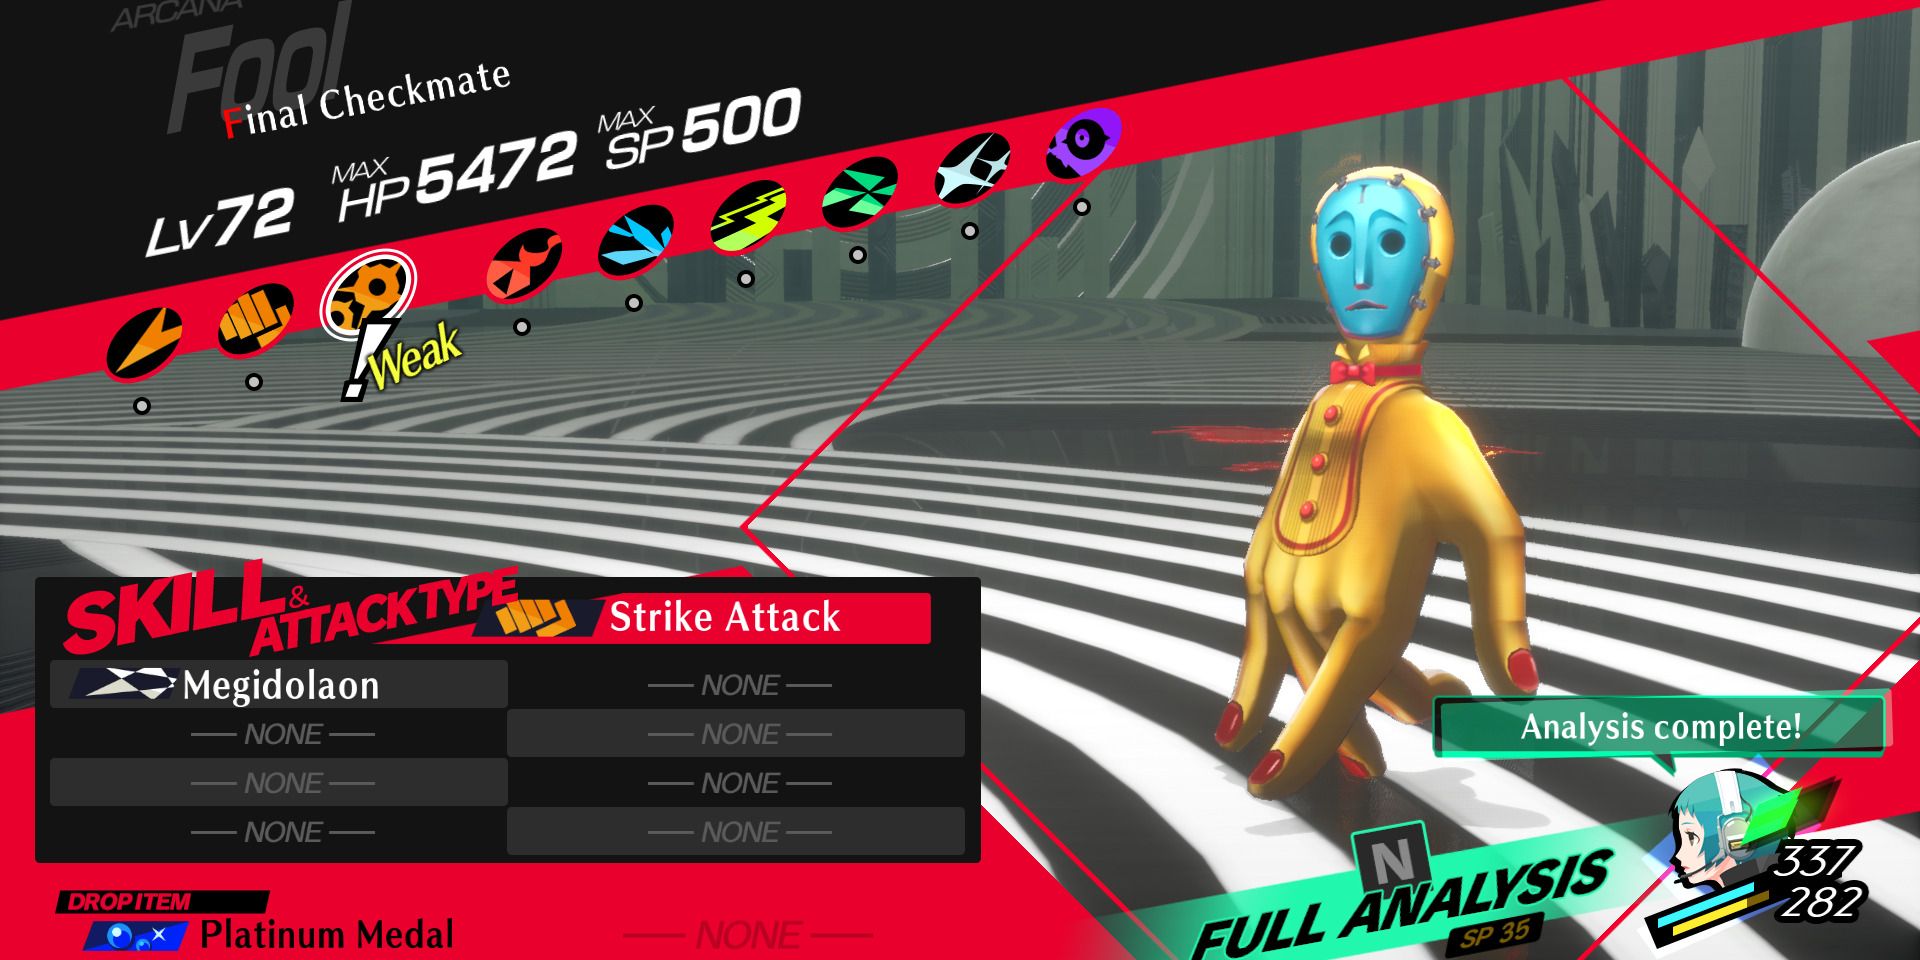 Image of the weaknesses and resistances of the Final Checkmate enemy in Persona 3 Reload